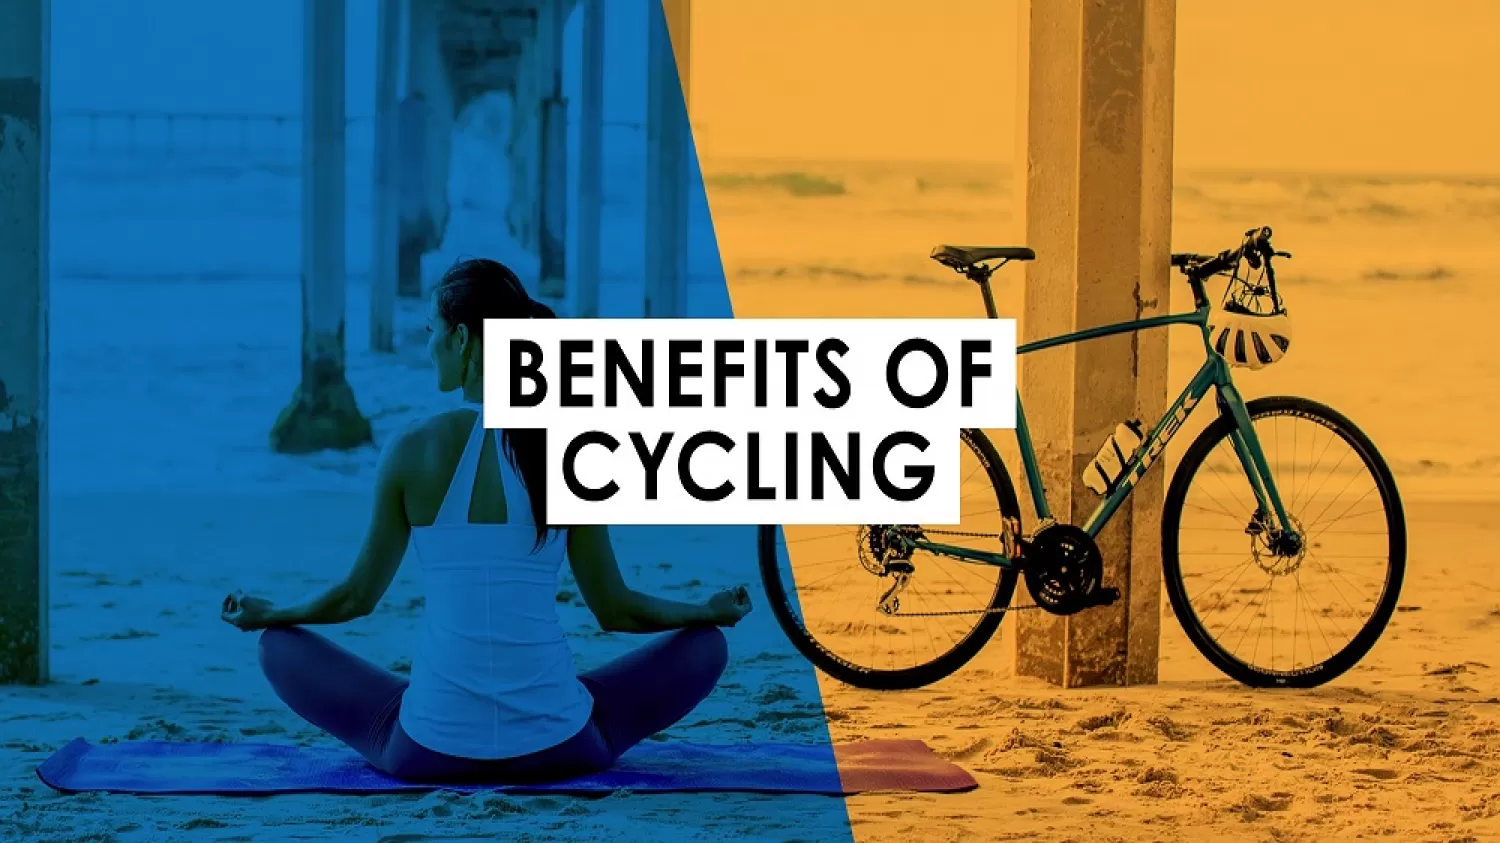 Mental & Physical Benefits of Cycling That’ll Make You Want to Do More